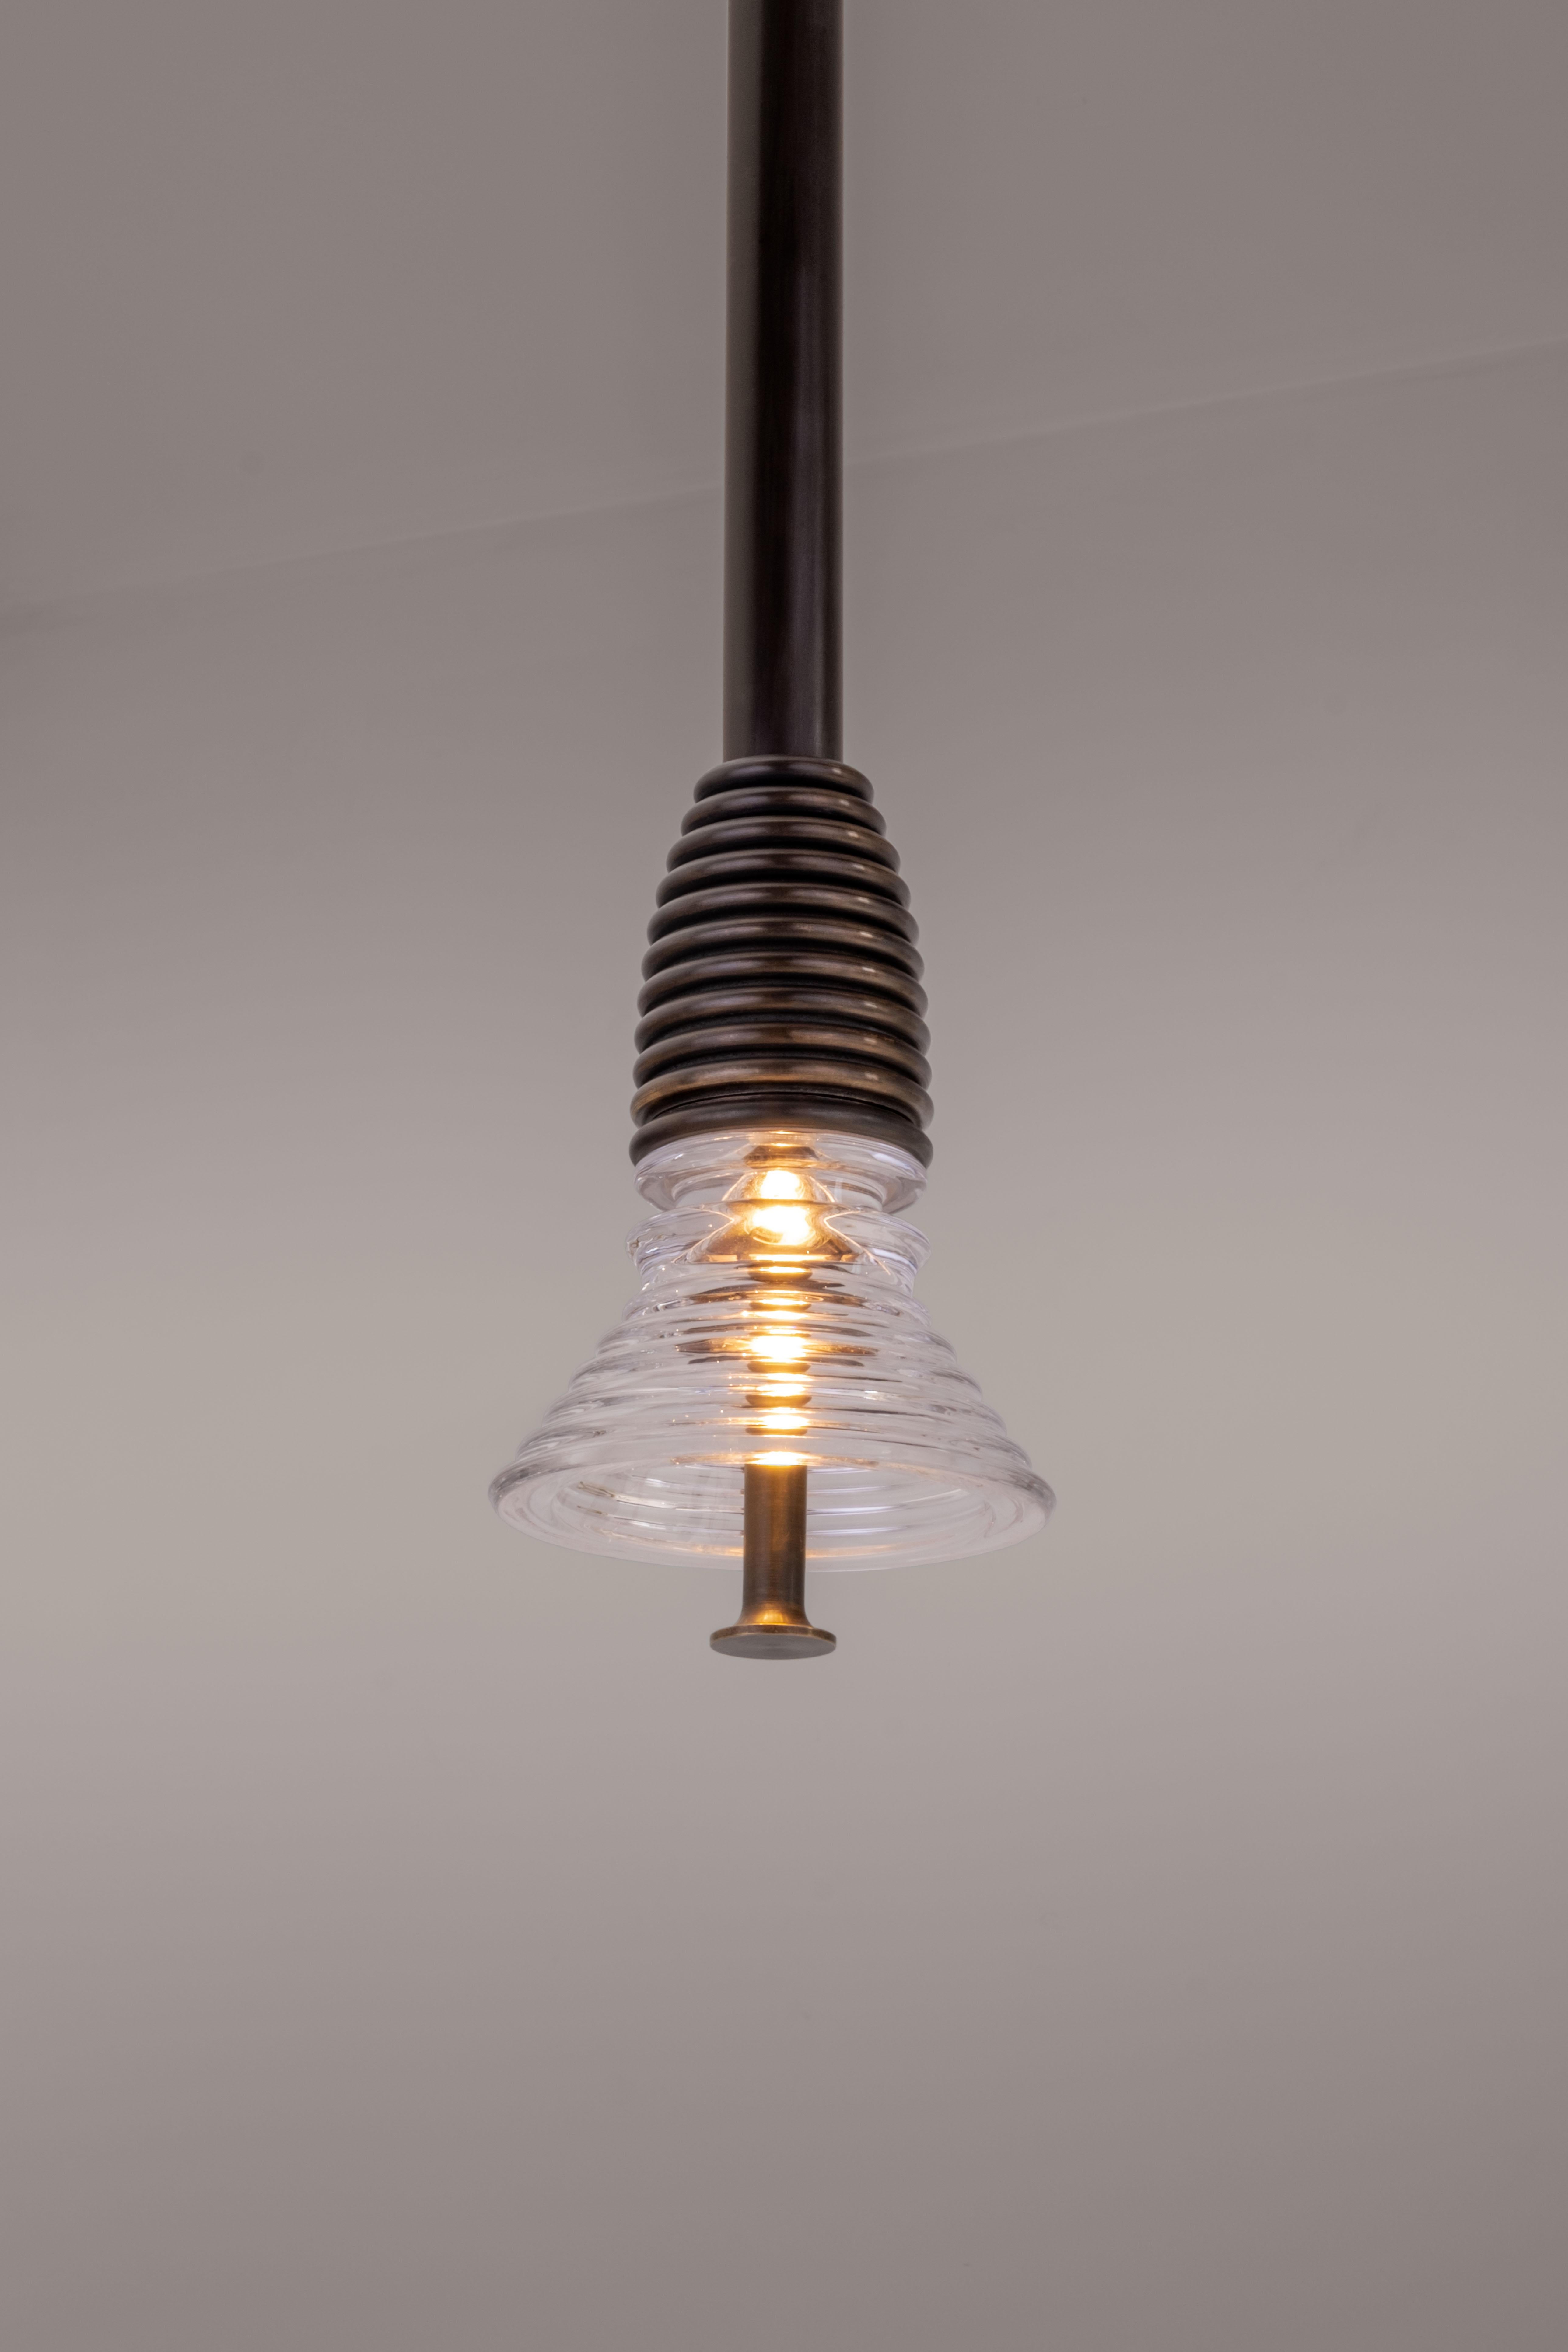 The Insulator 'A' Pendant in dark brass and frosted glass by NOVOCASTRIAN deco For Sale 4